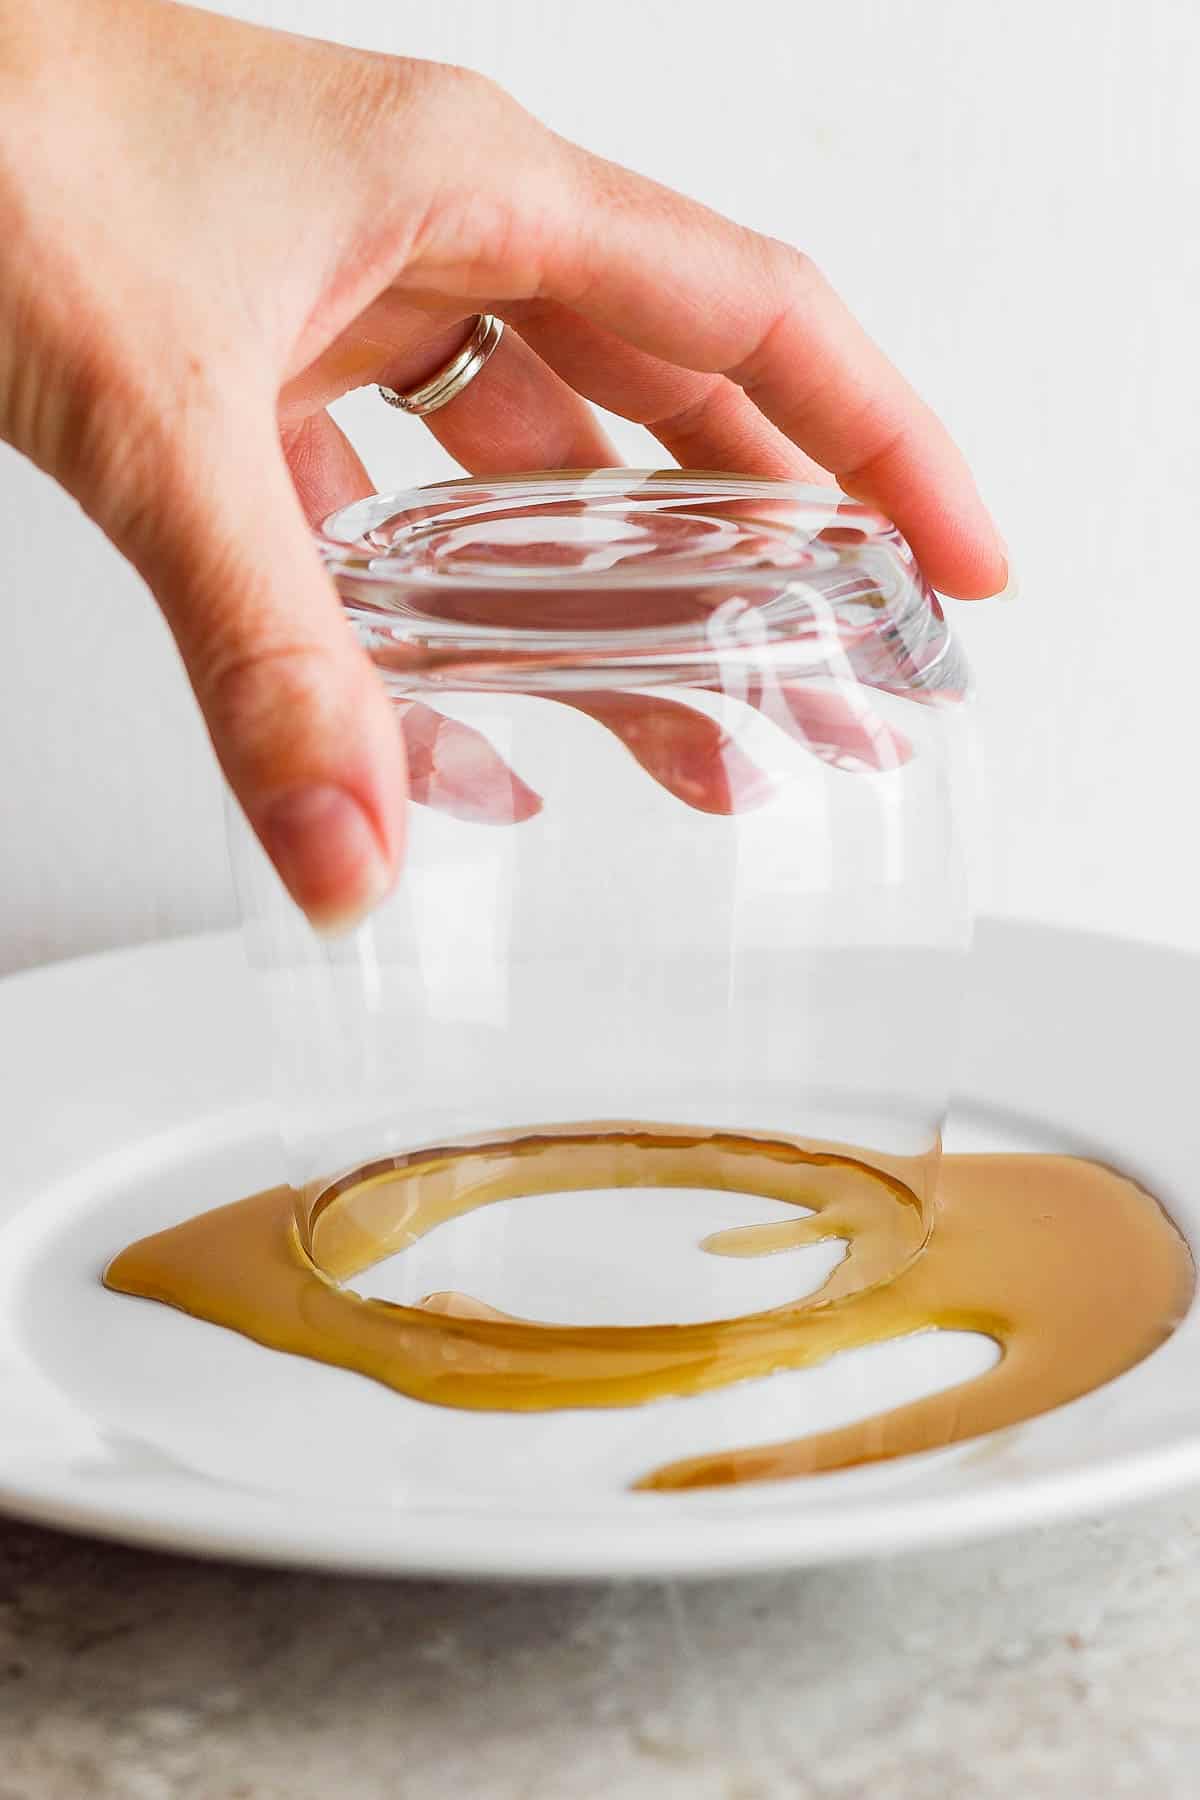 A hand holding a margarita glass upsidown and pressing the rim into a plate of maple syrup.